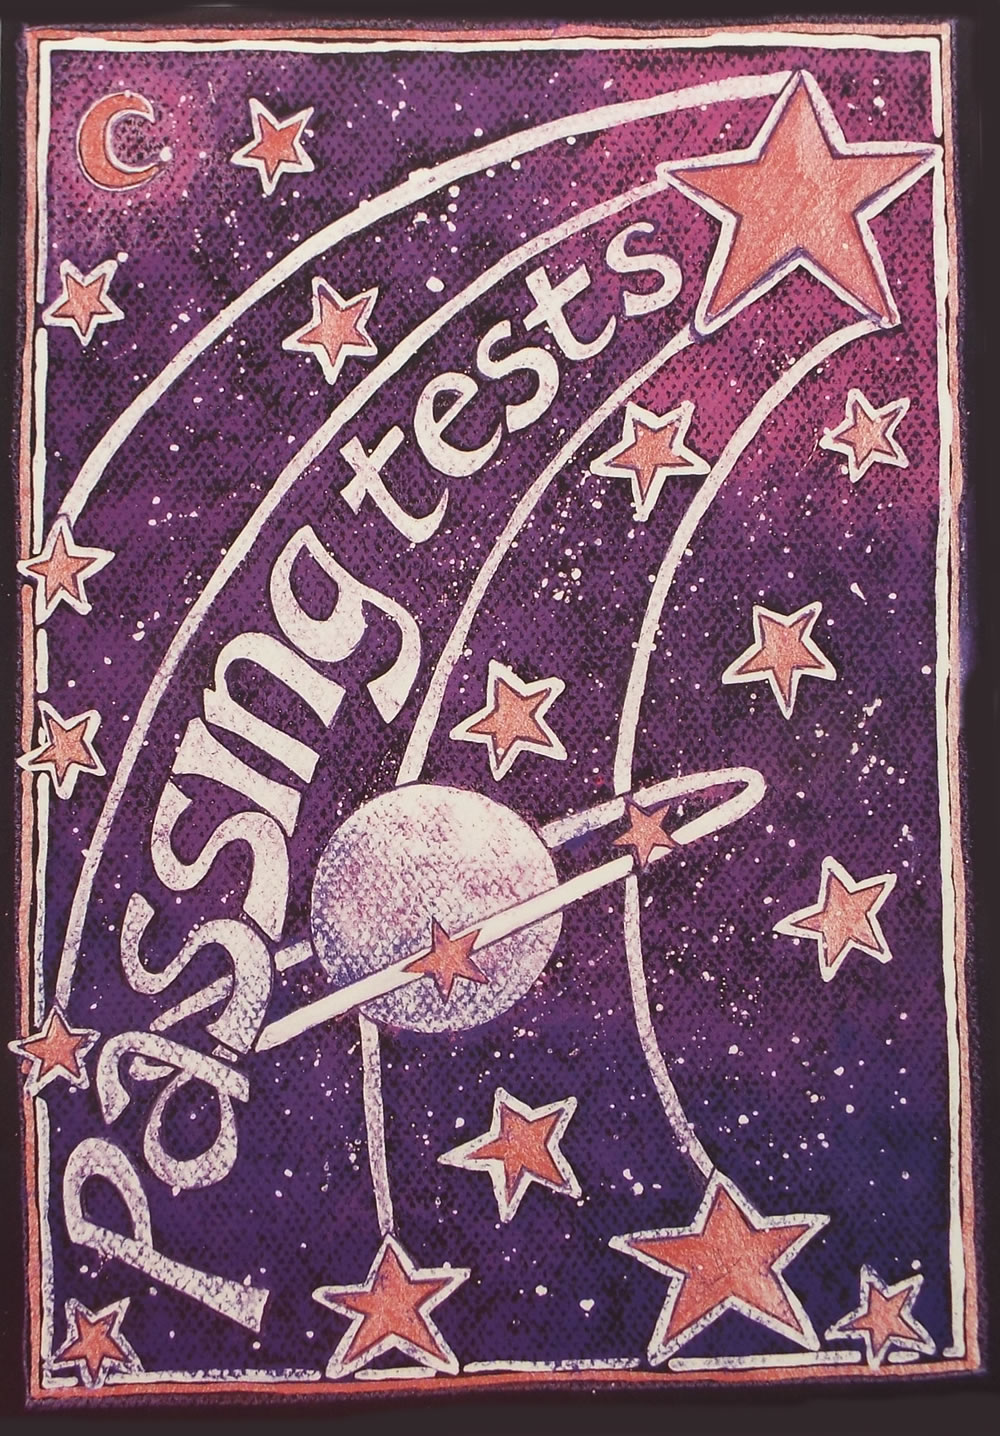 Passing Tests Spell Greetings Card by Annette Fry